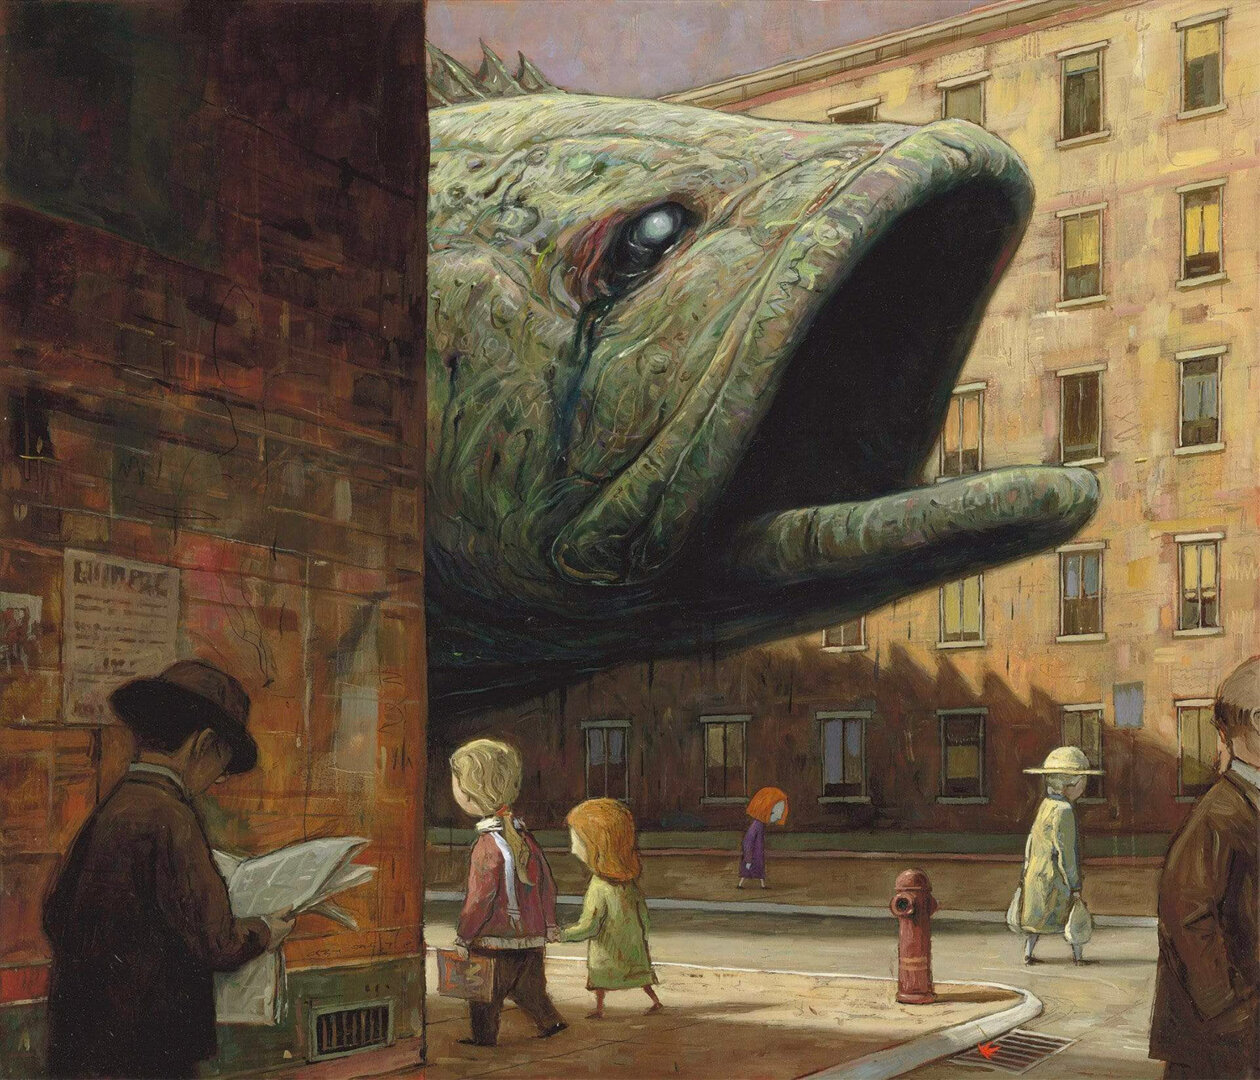 Dreamlike Paintings And Illustrations By Shaun Tan (1)